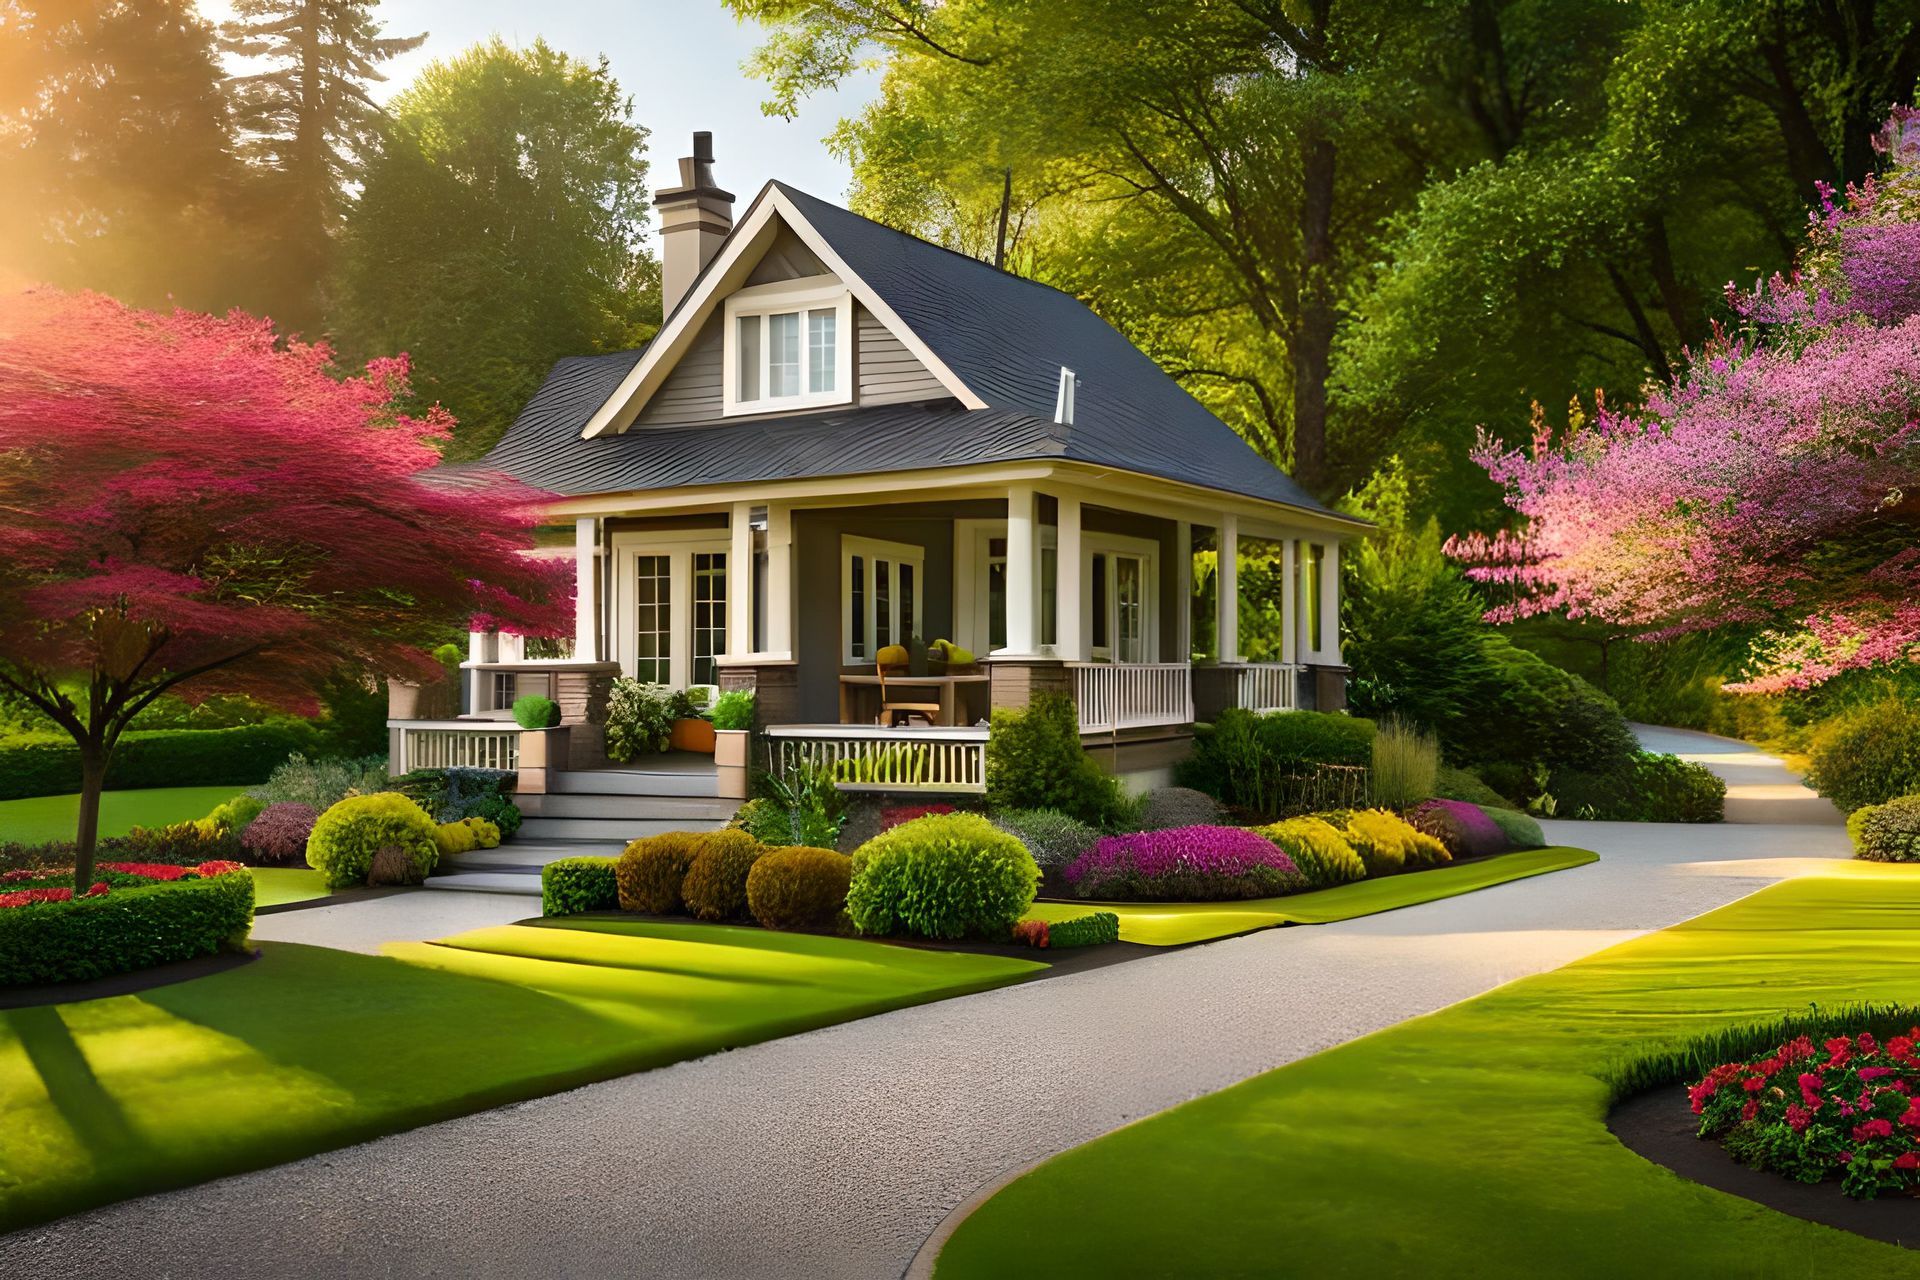 A house surrounded by trees and flowers with a driveway leading to it.